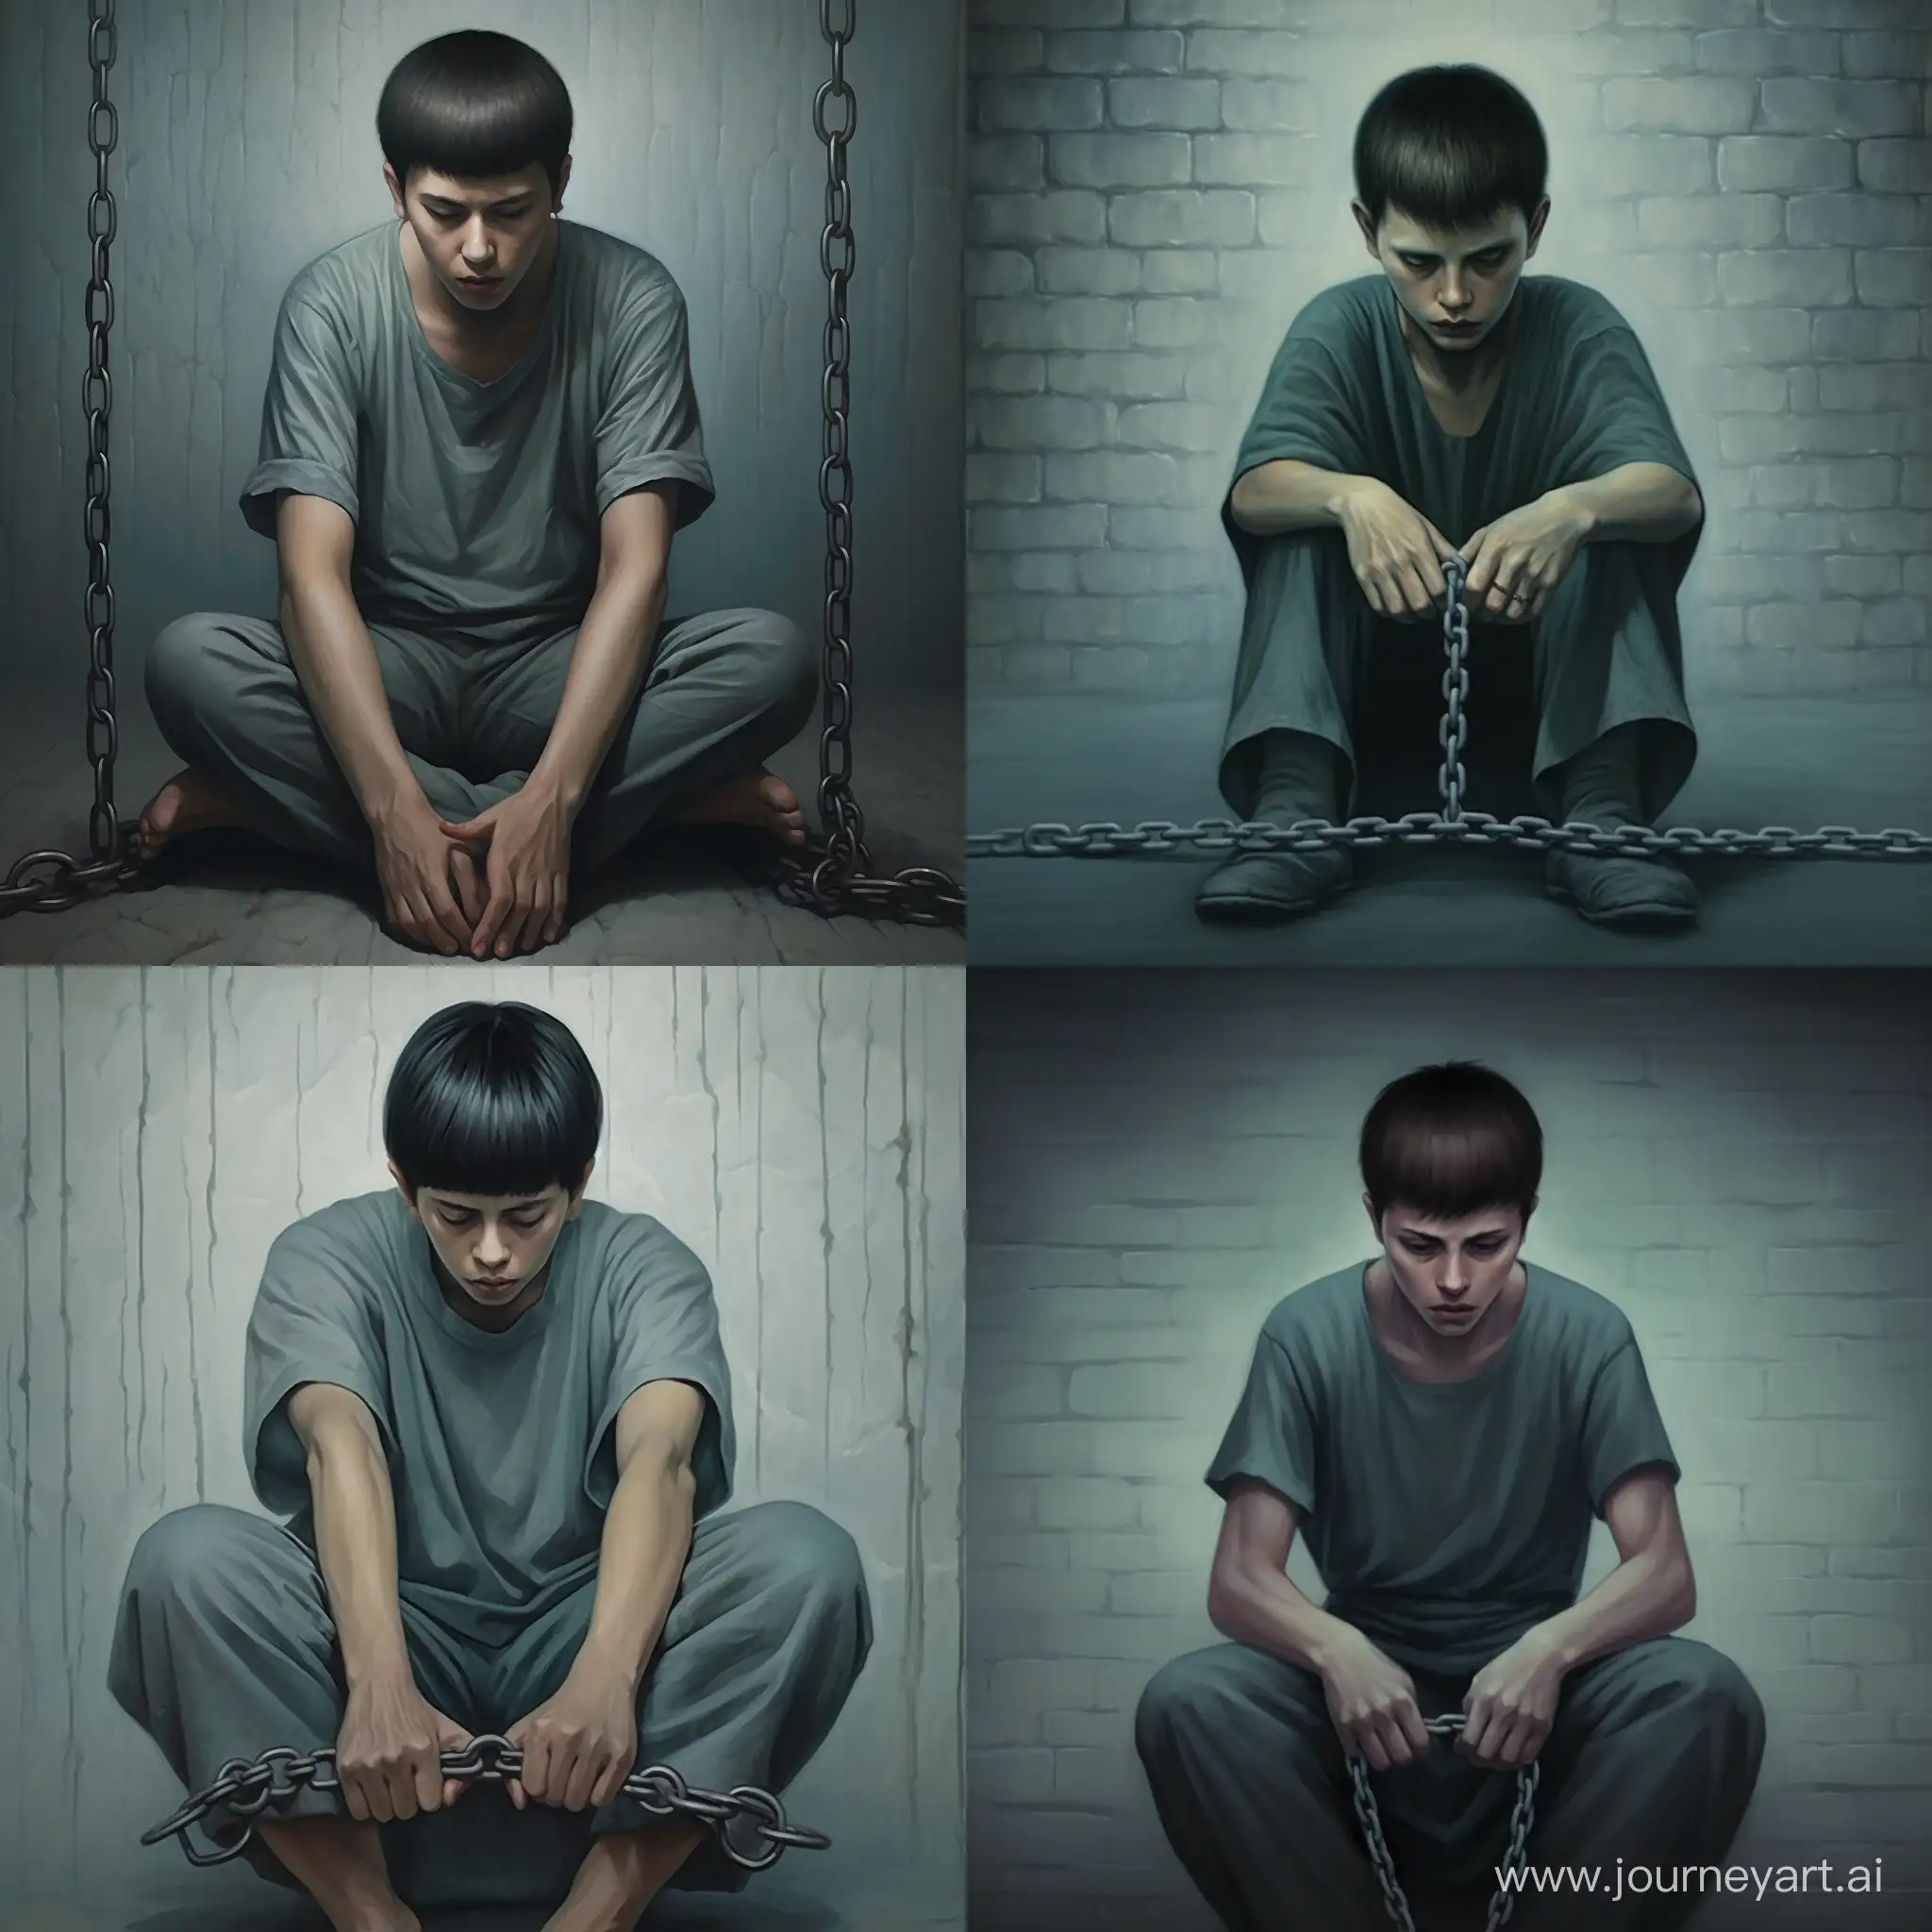 Ancient-Chinese-Torture-Scene-Handcuffed-Young-Man-in-Distress